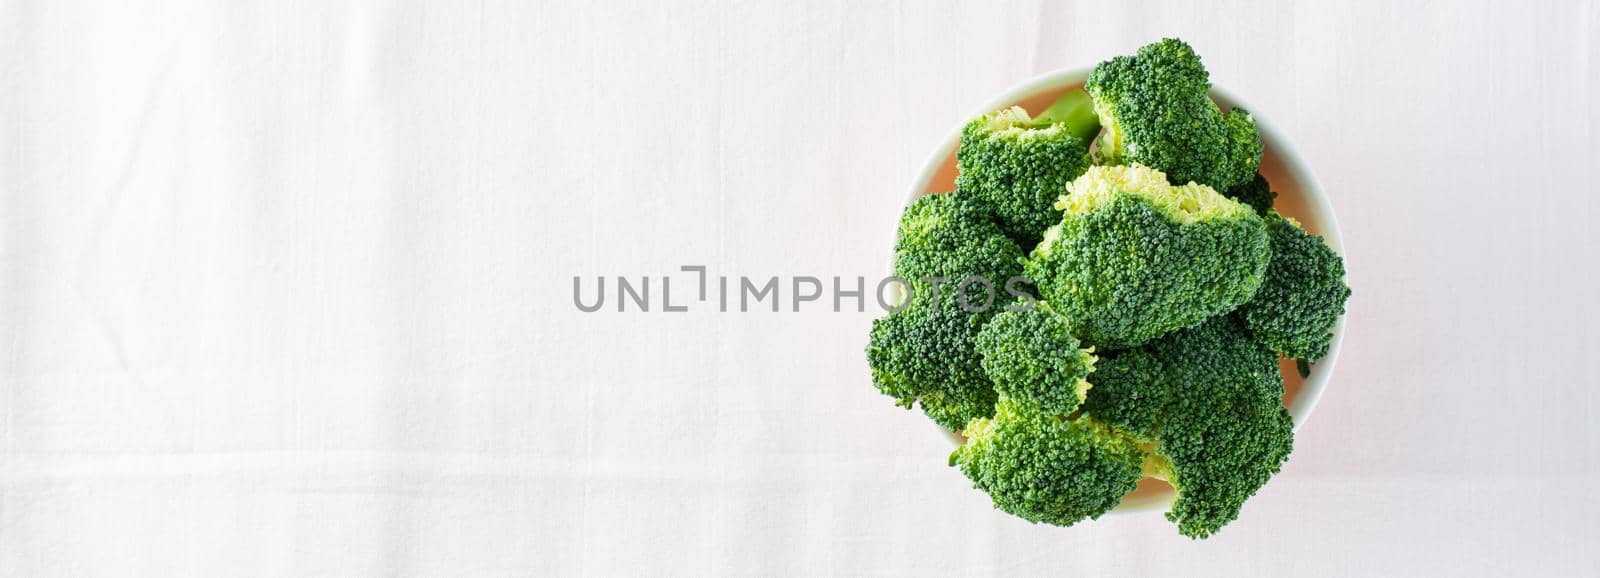 Fresh broccoli in a bowl on a table on a cloth. Diet healthy food. Top view. Copy space. Web banner